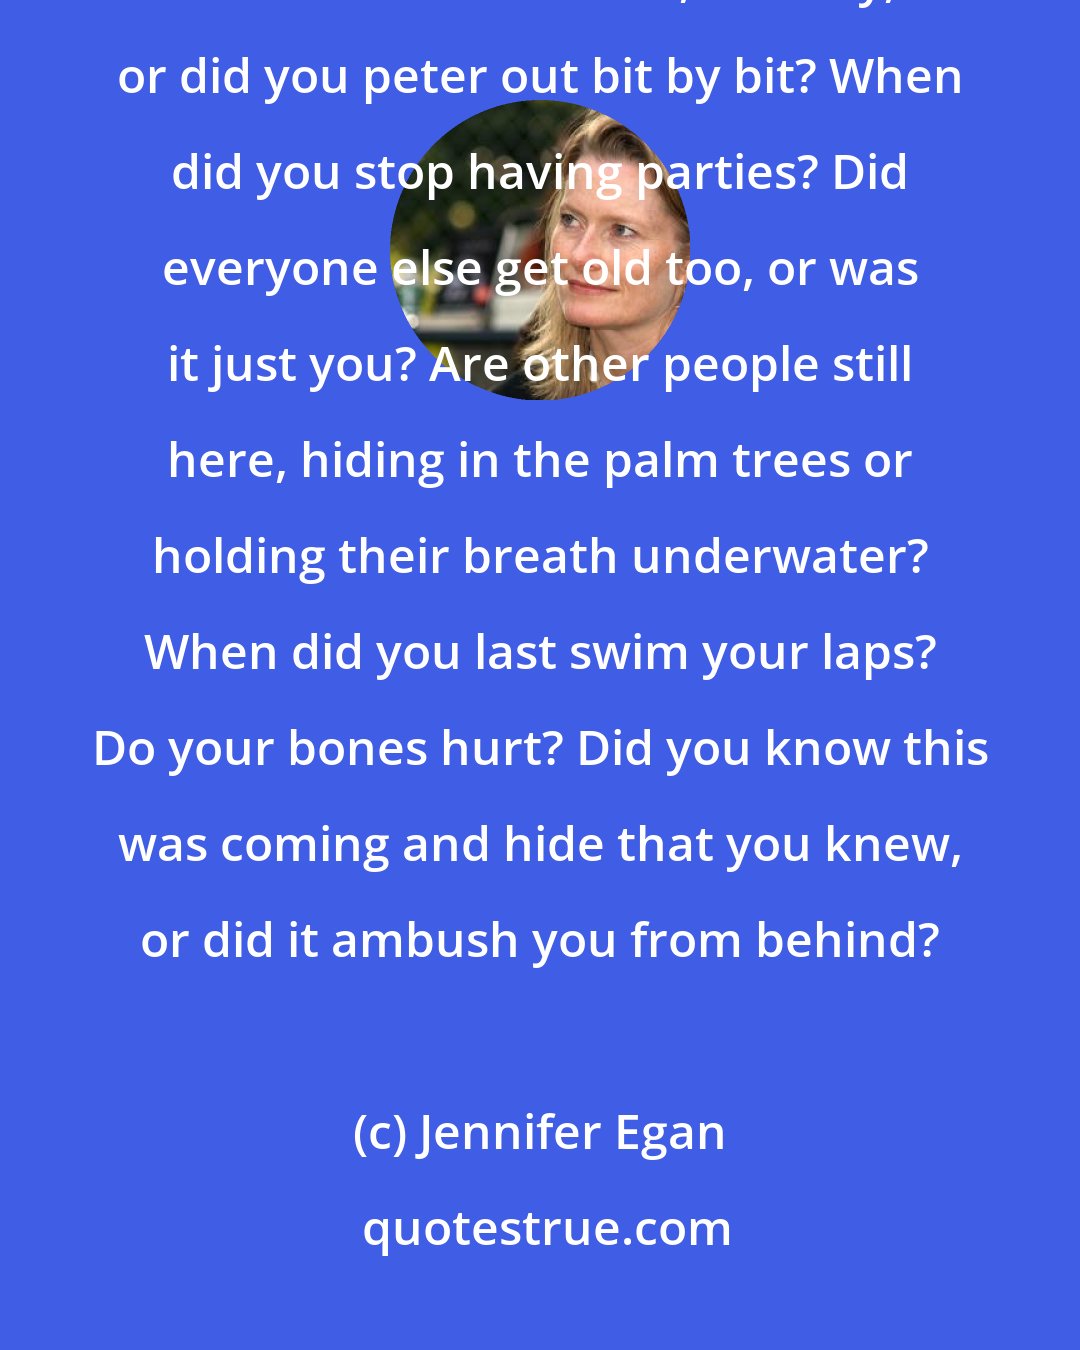 Jennifer Egan: We stand there, quiet. My questions all seem wrong: How did you get so old? Was it all at once, in a day, or did you peter out bit by bit? When did you stop having parties? Did everyone else get old too, or was it just you? Are other people still here, hiding in the palm trees or holding their breath underwater? When did you last swim your laps? Do your bones hurt? Did you know this was coming and hide that you knew, or did it ambush you from behind?